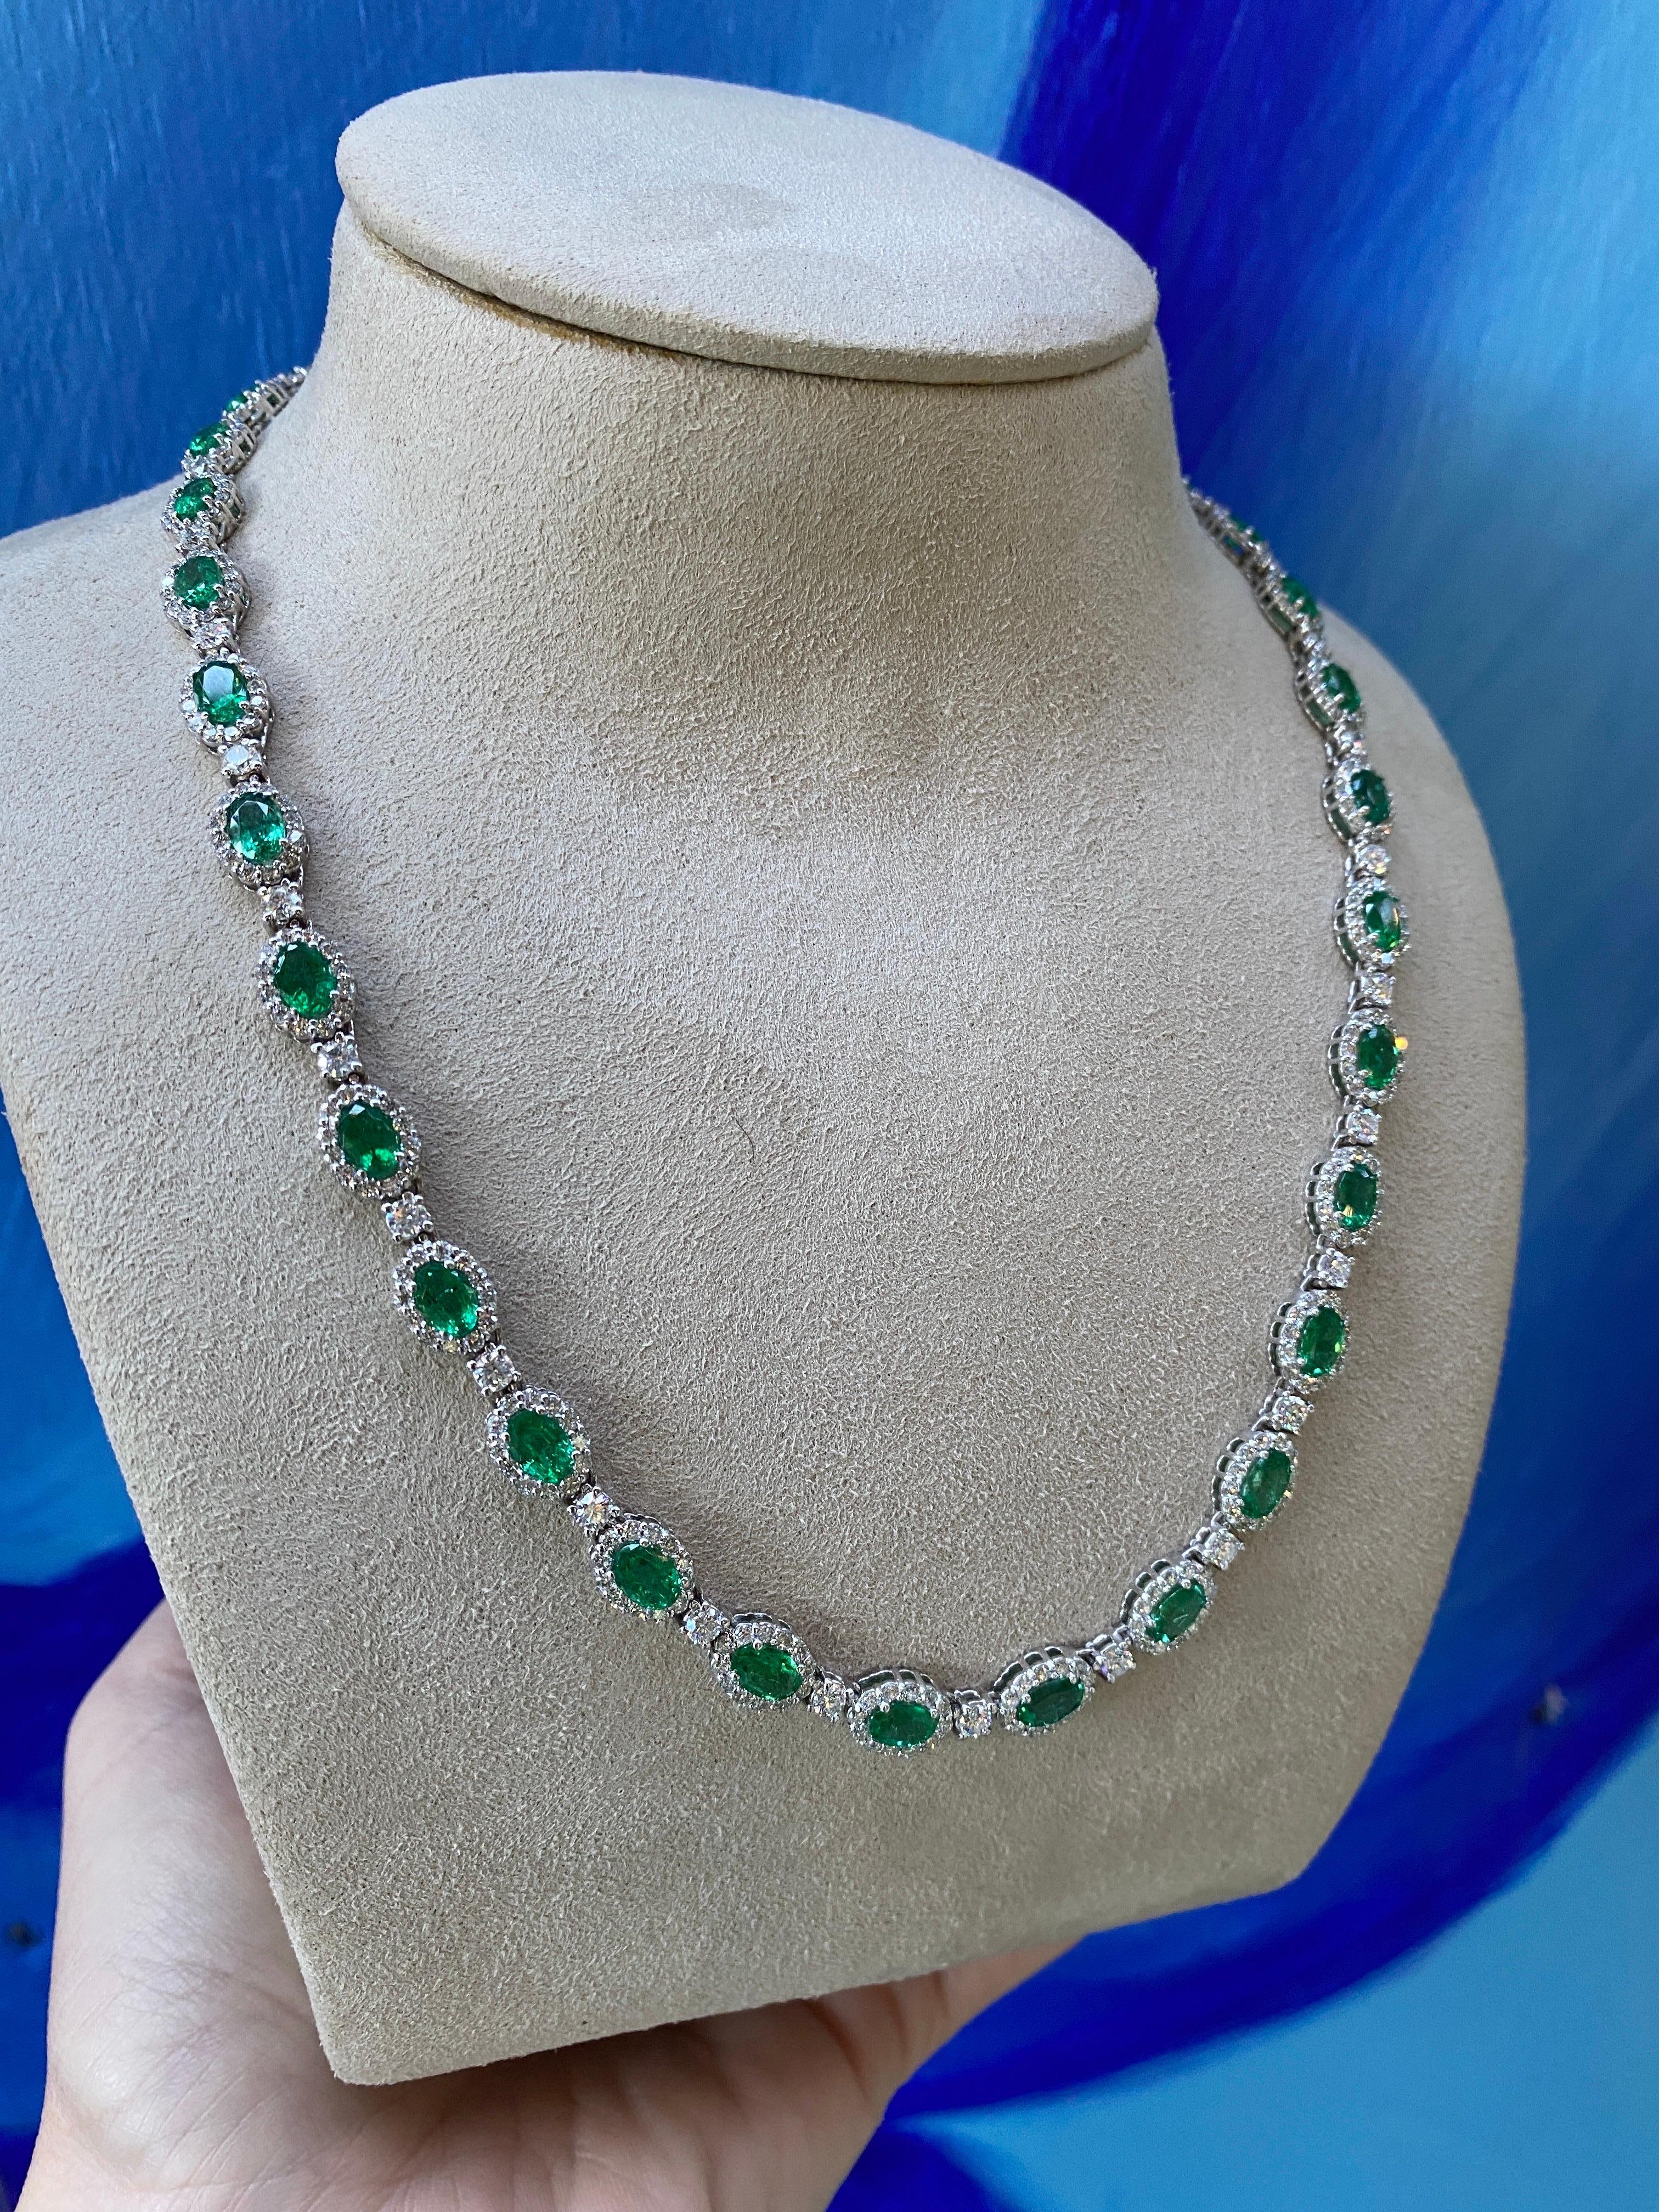 14.12 Carat Total Weight Oval Cut Emerald & 8.66ctw Round Diamond Necklace For Sale 1